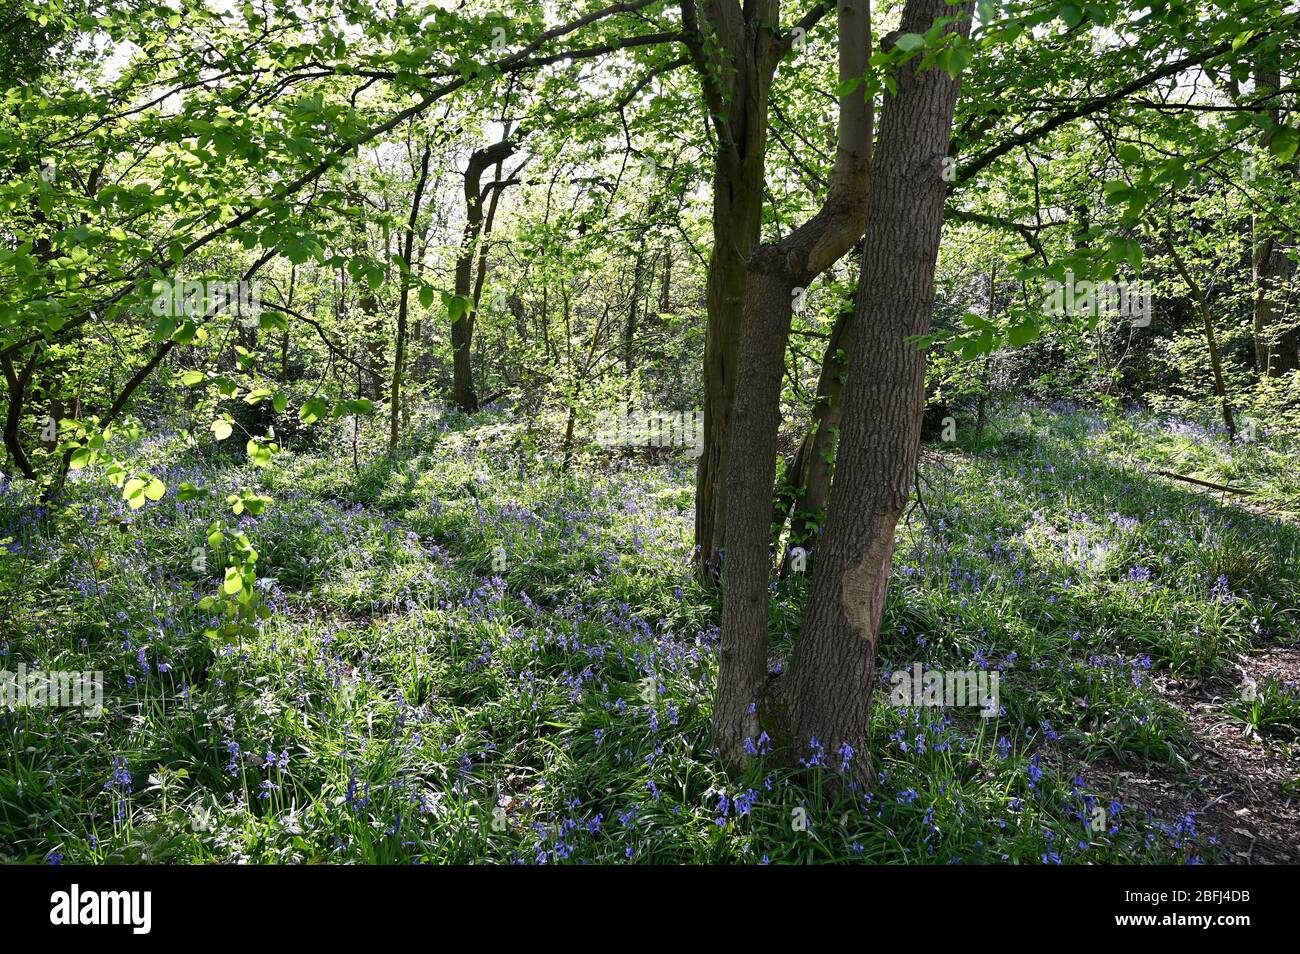 Bluebell Woods, Roots Cray Meadows, Sidcup, Kent. ROYAUME-UNI Banque D'Images